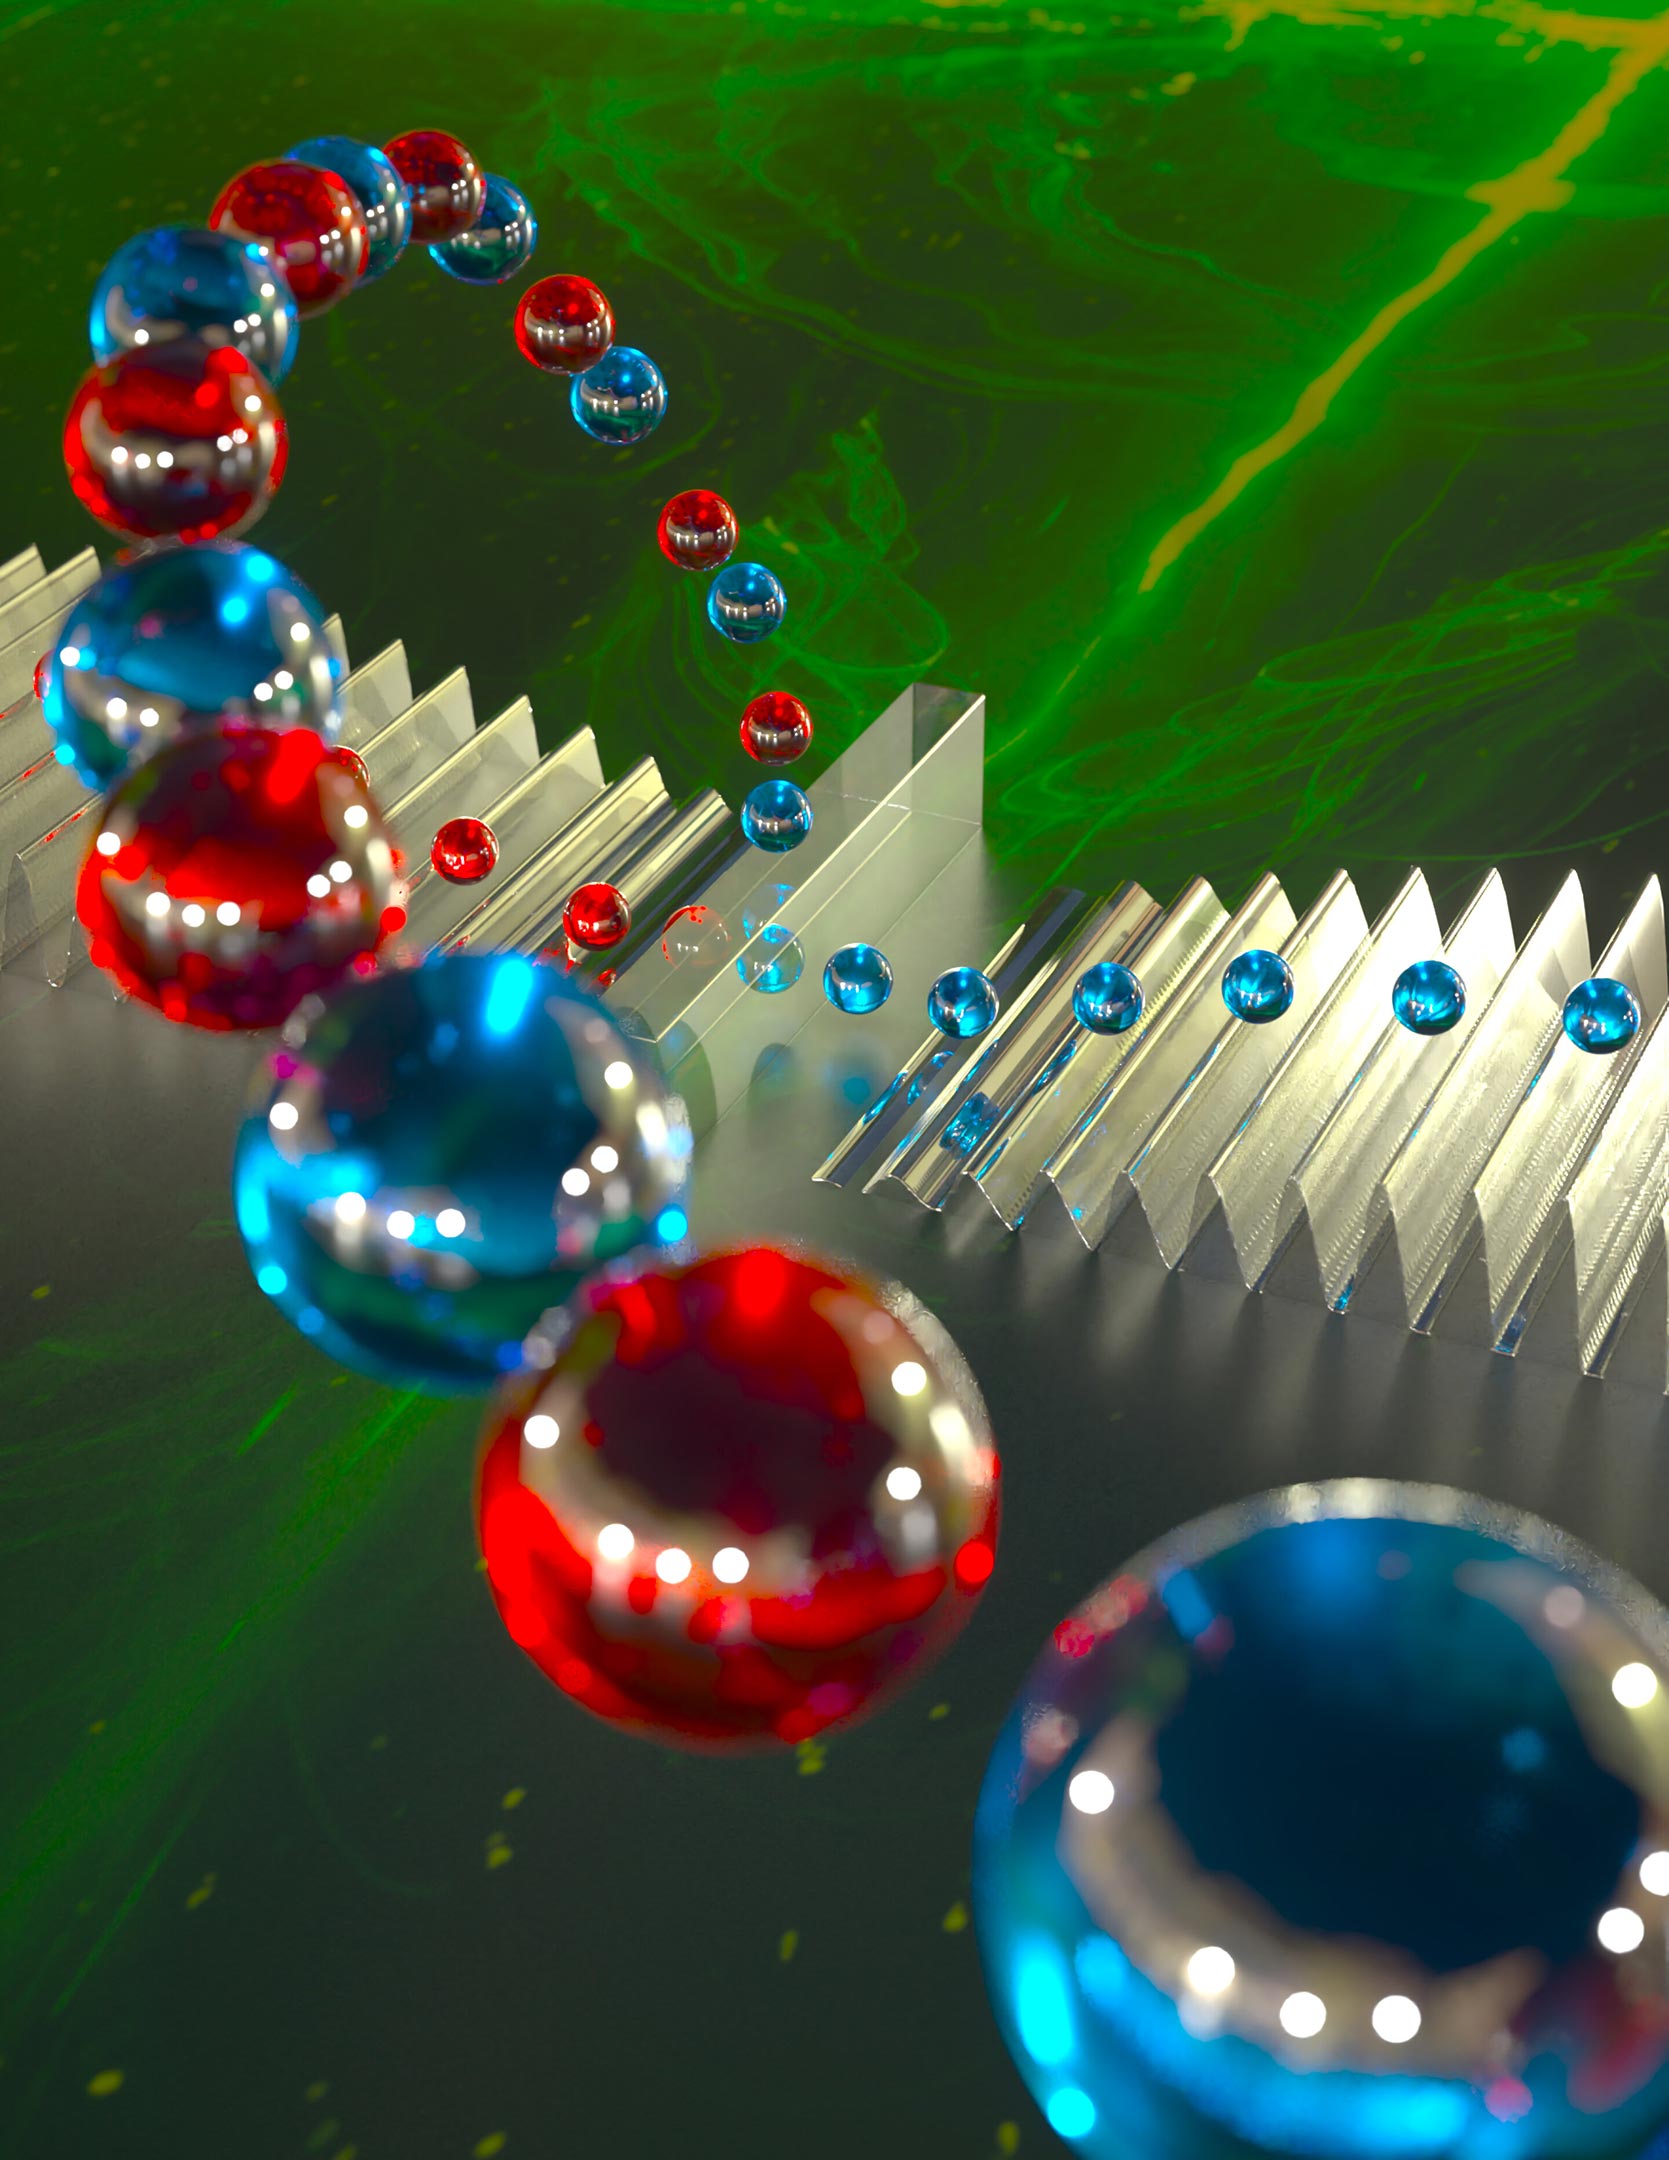 Researchers “Split” Phonons in Step Toward New Type of Linear Mechanical Quantum Computer